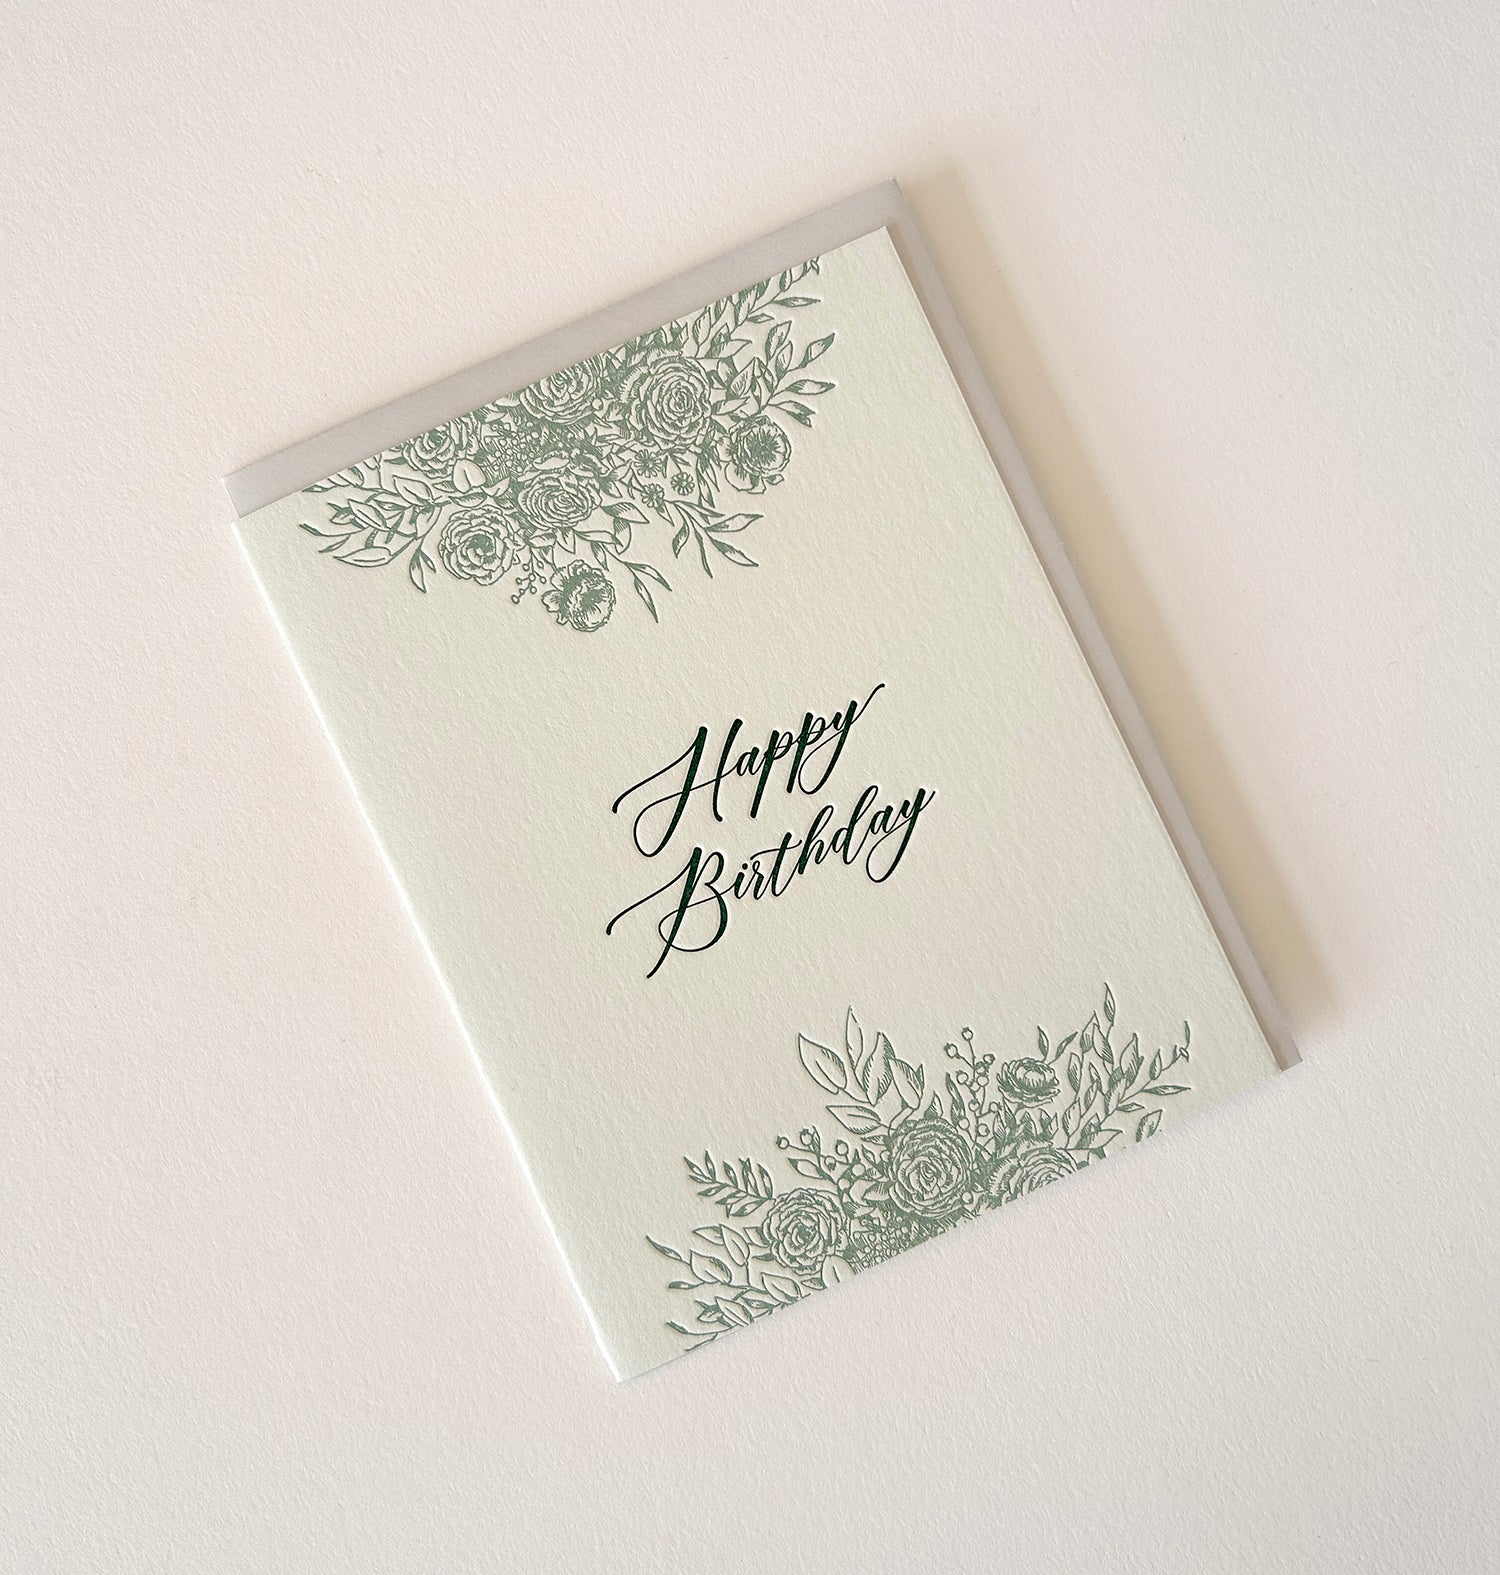 Letterpress birthday card with florals that says "Happy Birthday" by Rust Belt Love